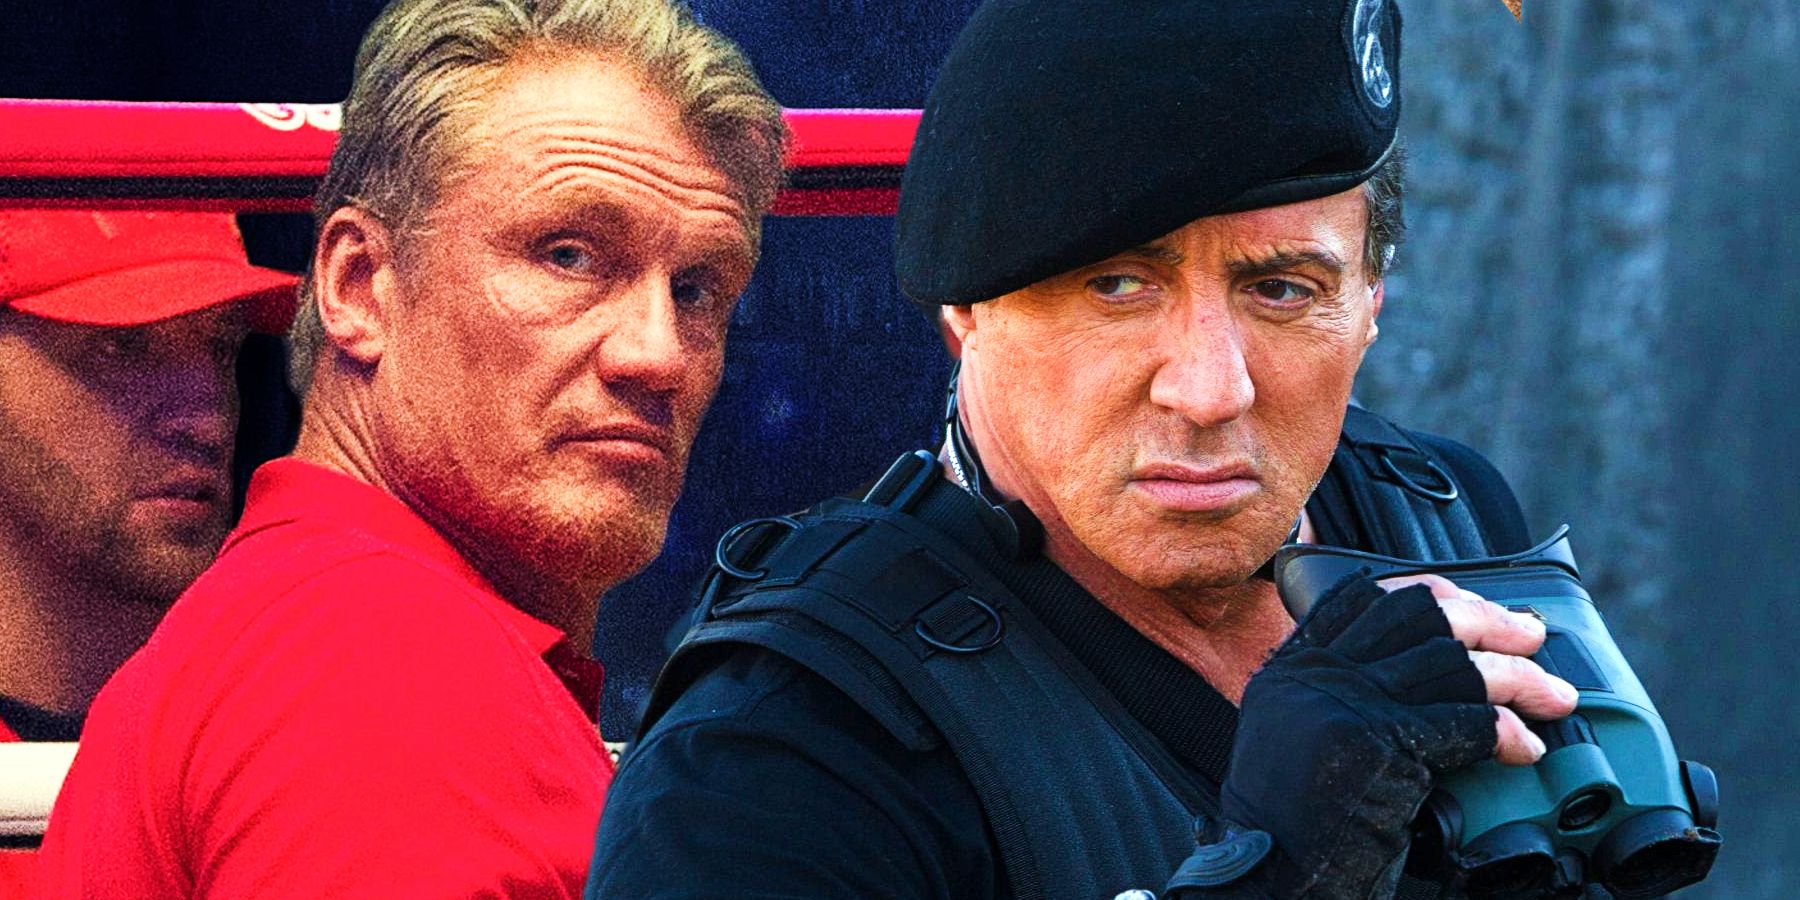 Dolph Lundgren in Creed II and Sylvester Stallone in The Expendables 3